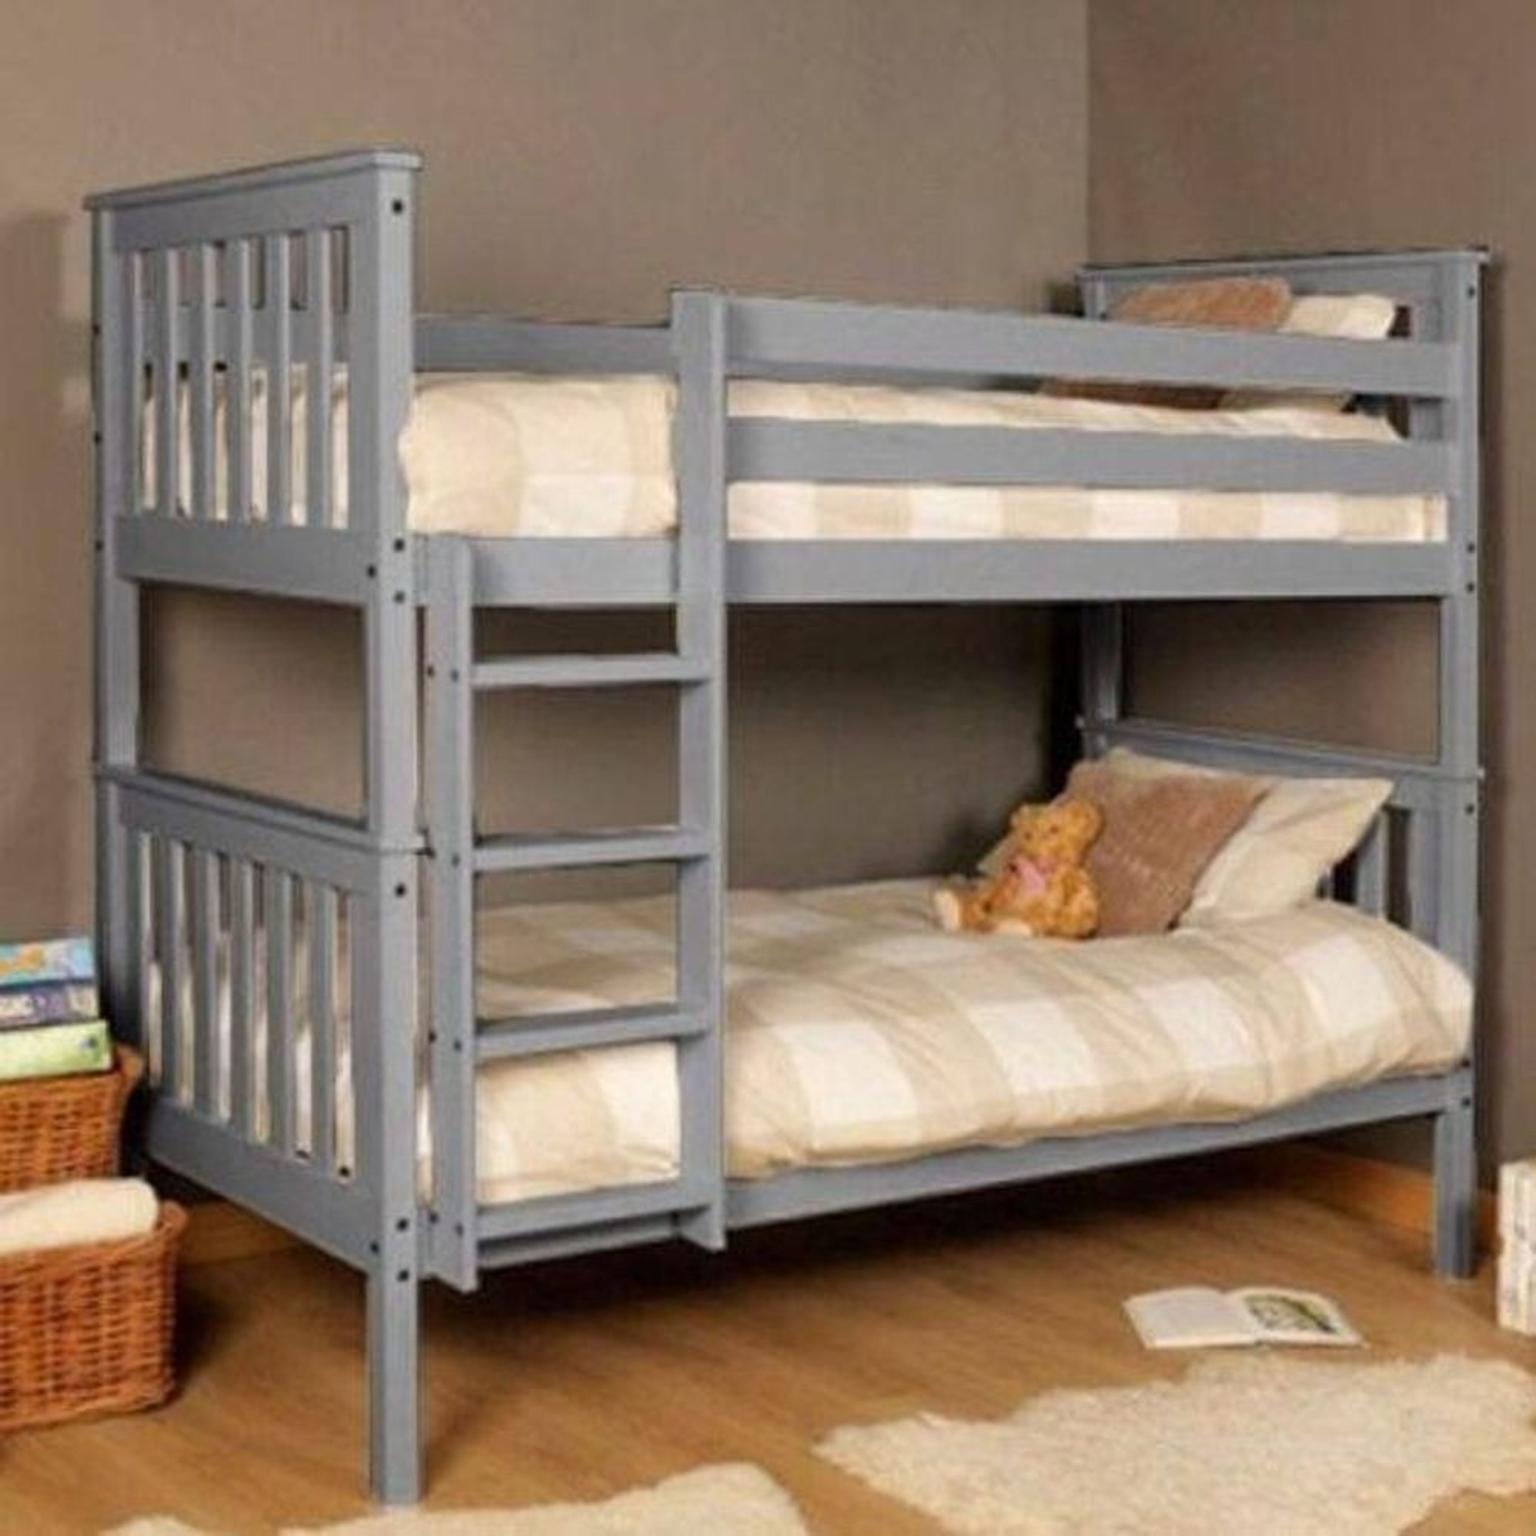 New 3ft Grey Atlantis Bunk Beds, Bunk Beds Free Delivery